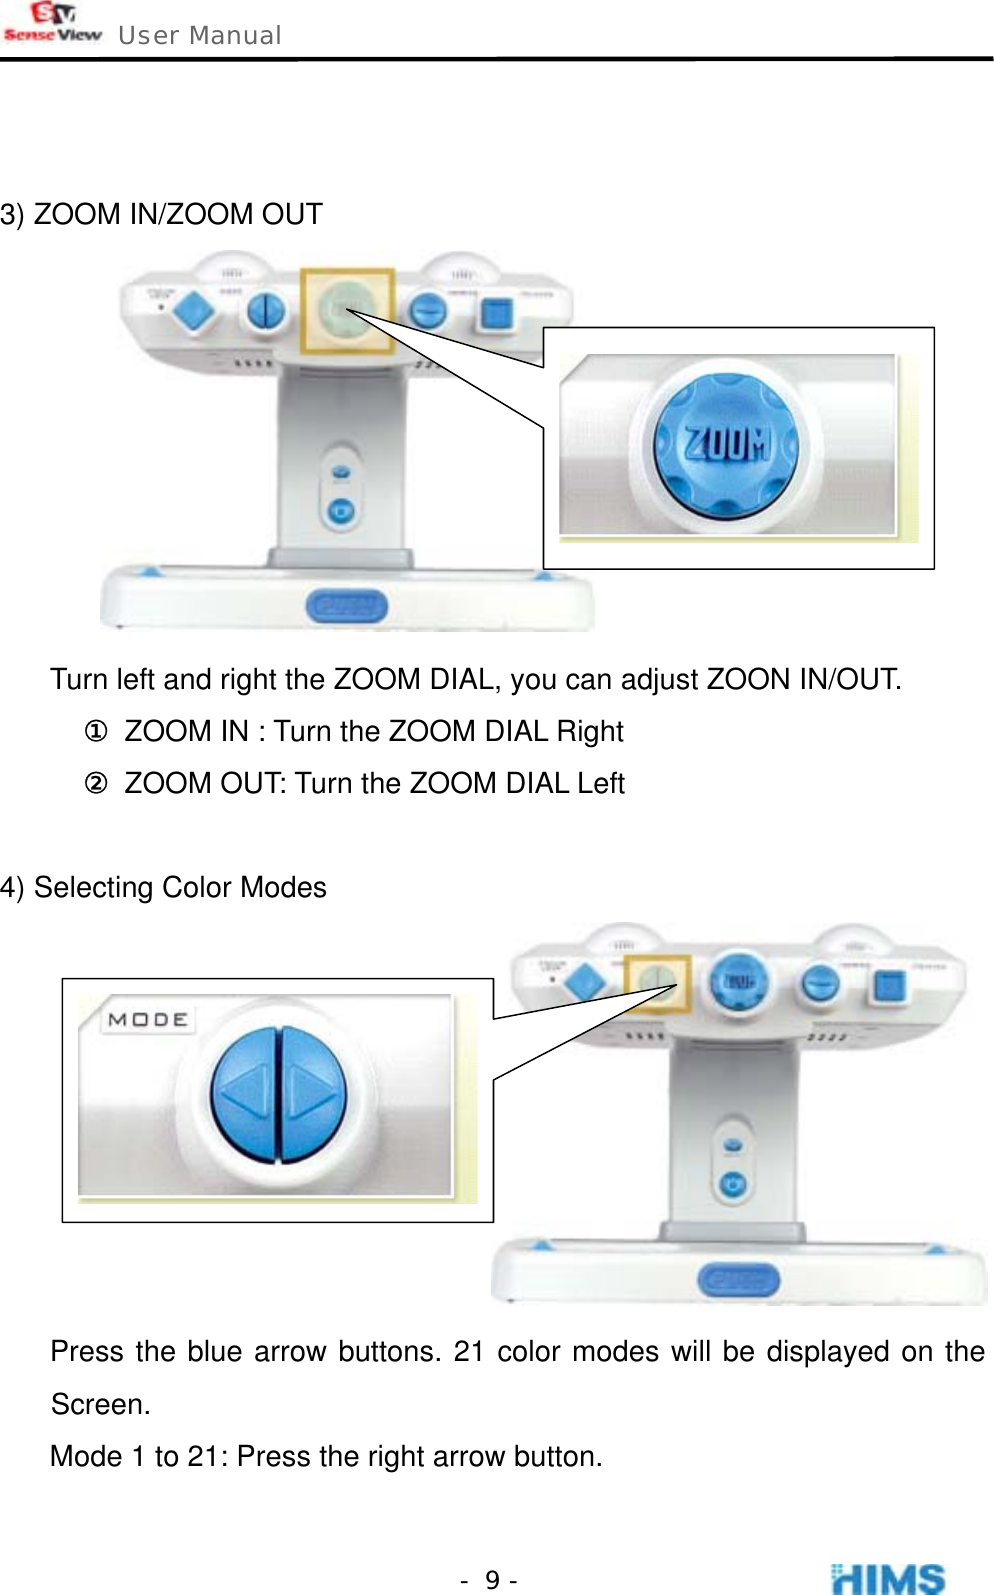  User Manual    - 9 -  3) ZOOM IN/ZOOM OUT  Turn left and right the ZOOM DIAL, you can adjust ZOON IN/OUT. ① ZOOM IN : Turn the ZOOM DIAL Right ② ZOOM OUT: Turn the ZOOM DIAL Left  4) Selecting Color Modes   Press the blue arrow buttons. 21 color modes will be displayed on the Screen. Mode 1 to 21: Press the right arrow button. 